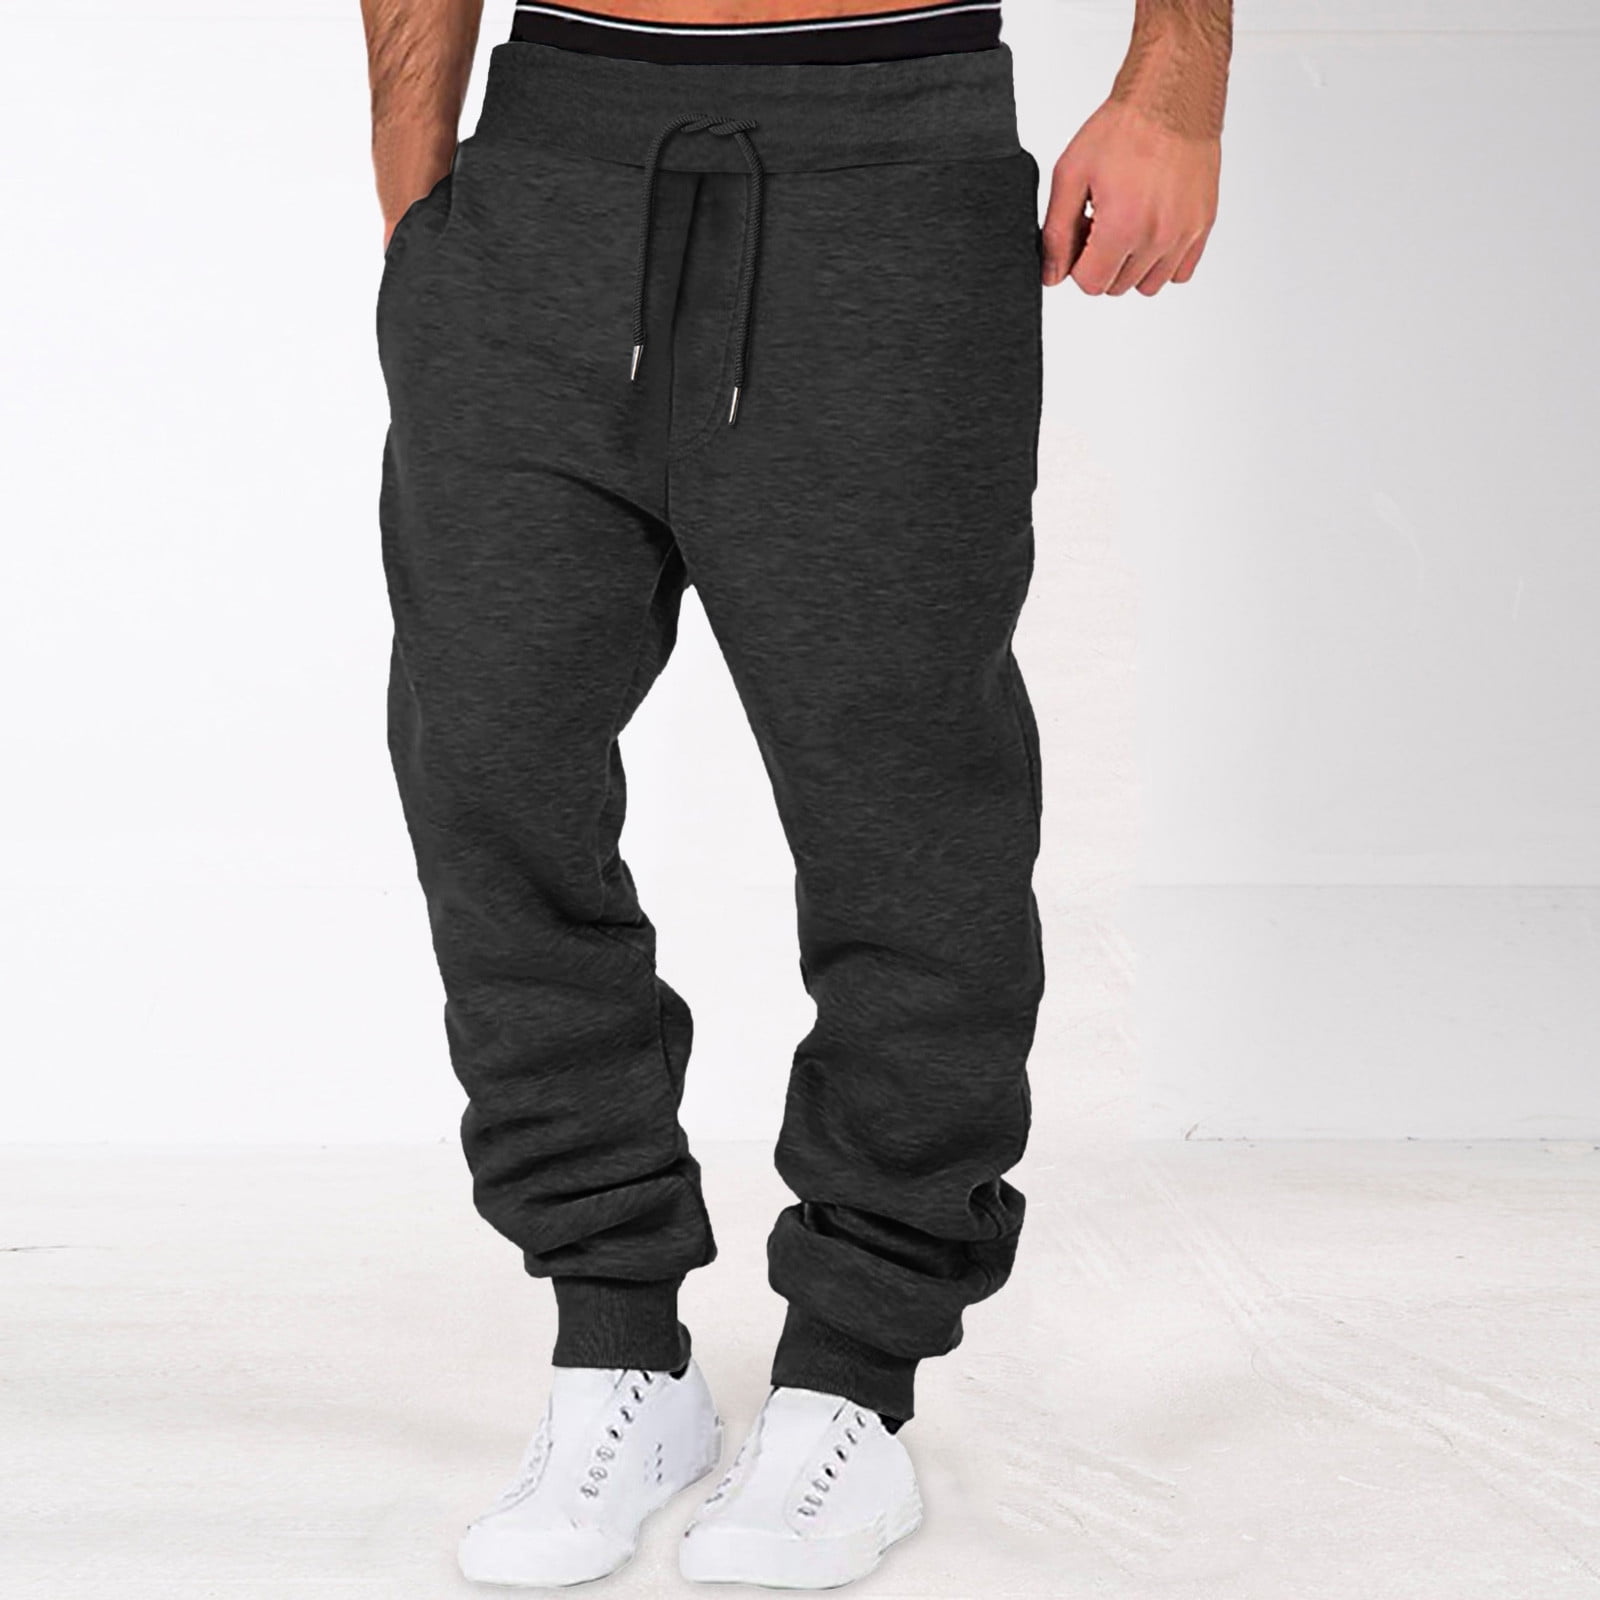 Black Sweatpants For Men Mens Autumn And Winter High Street Fashion Leisure  Loose Sports Running Solid Color Lace Up Pants Sweater Pants Trousers  Sweatpants 